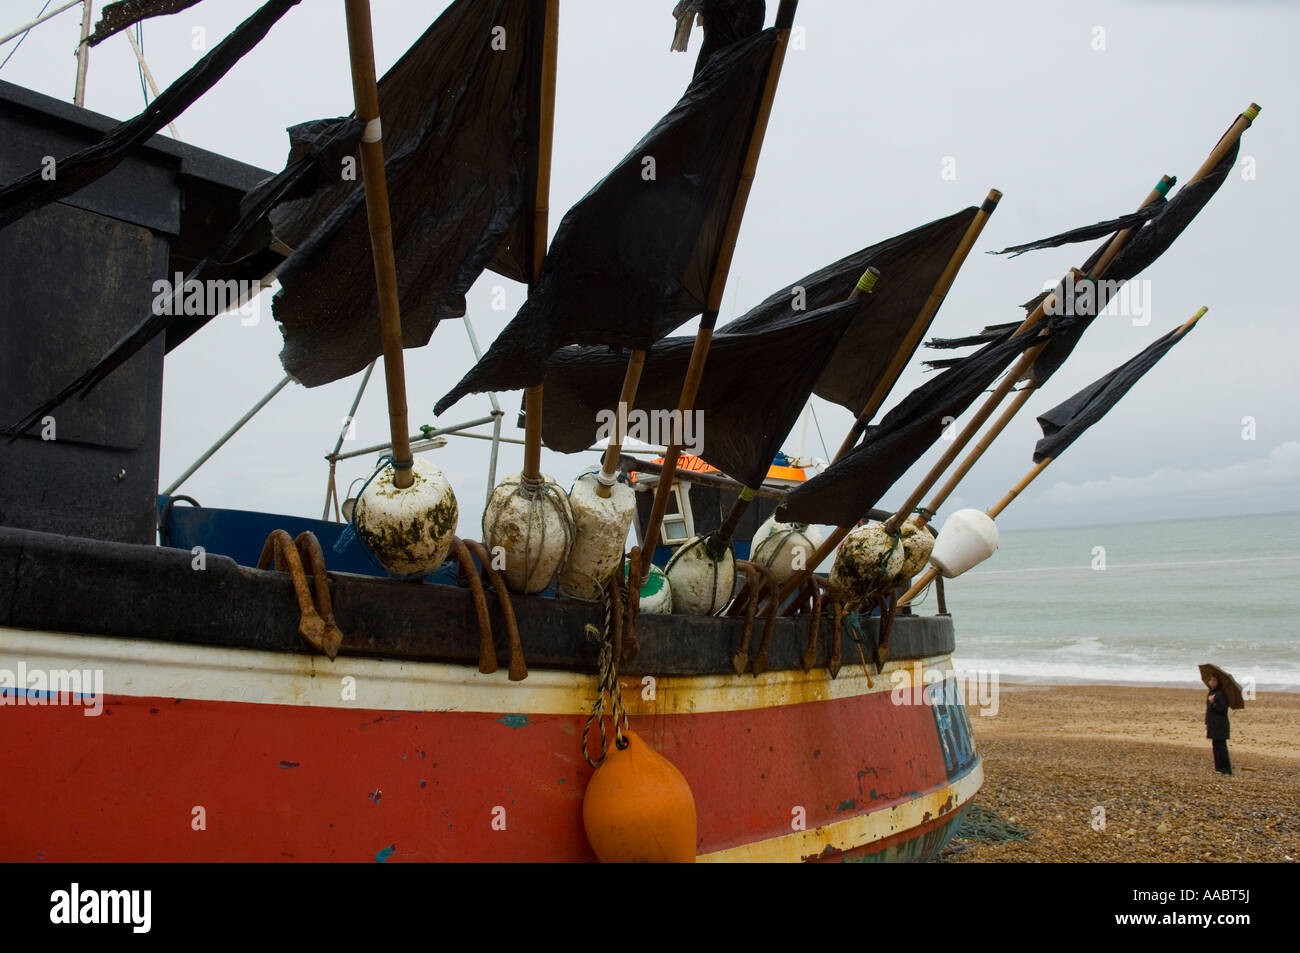 Fishing boat with black flags on the beach on a rainy day, Hastings Stock Photo